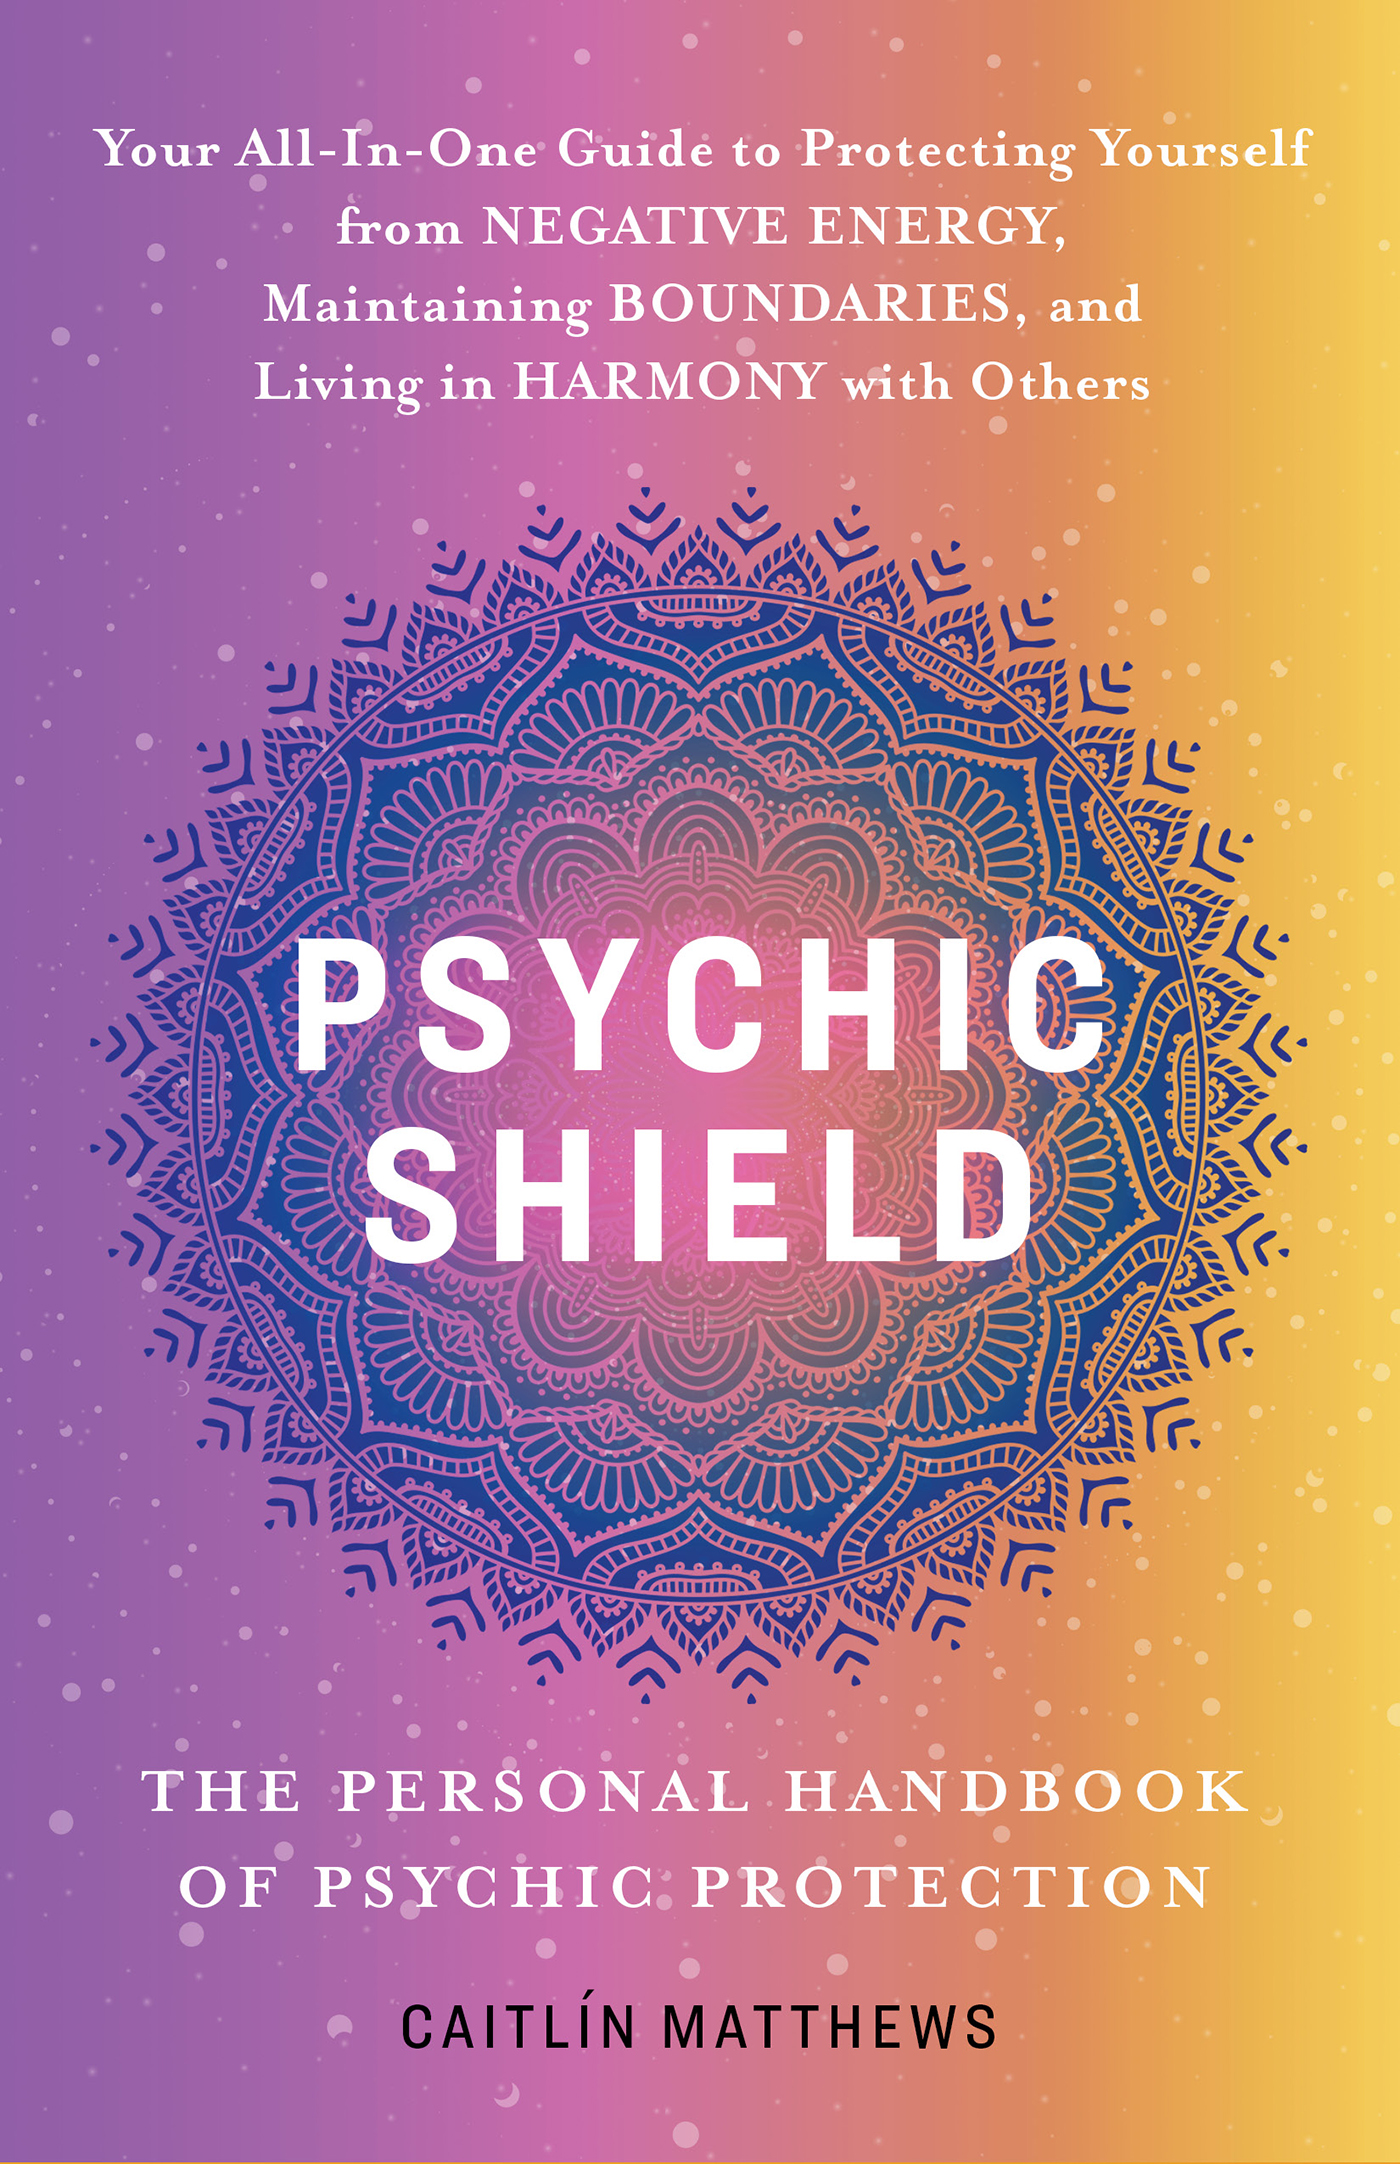 Psychic protection